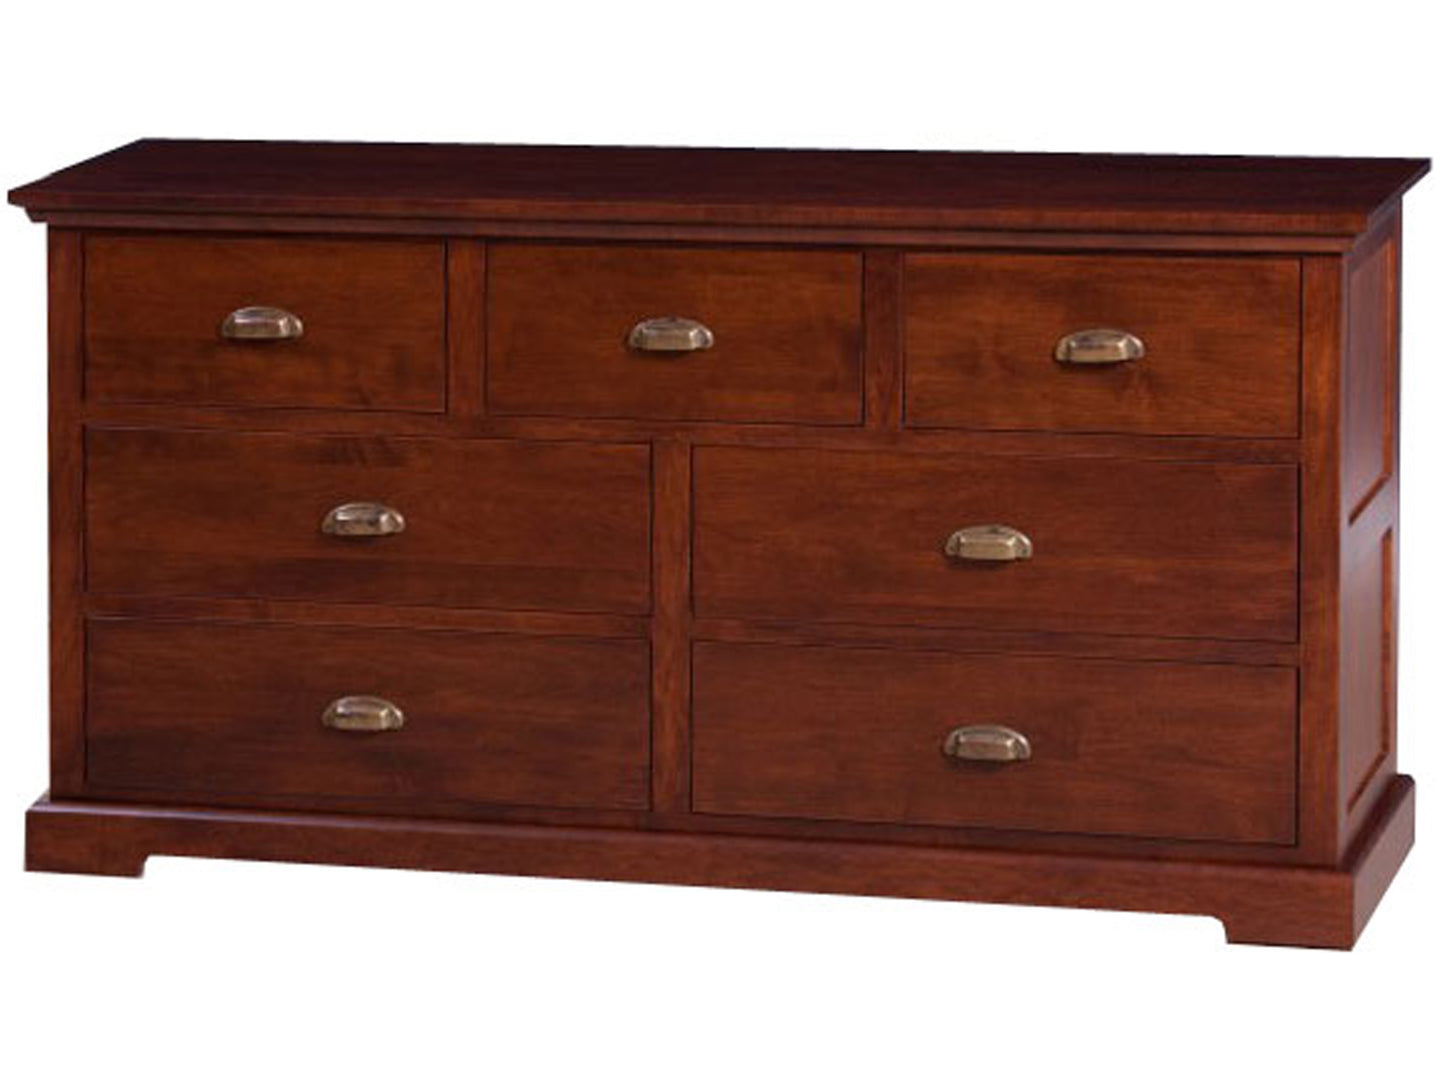 Stanford dresser - solid wood, locally built, Canadian made|